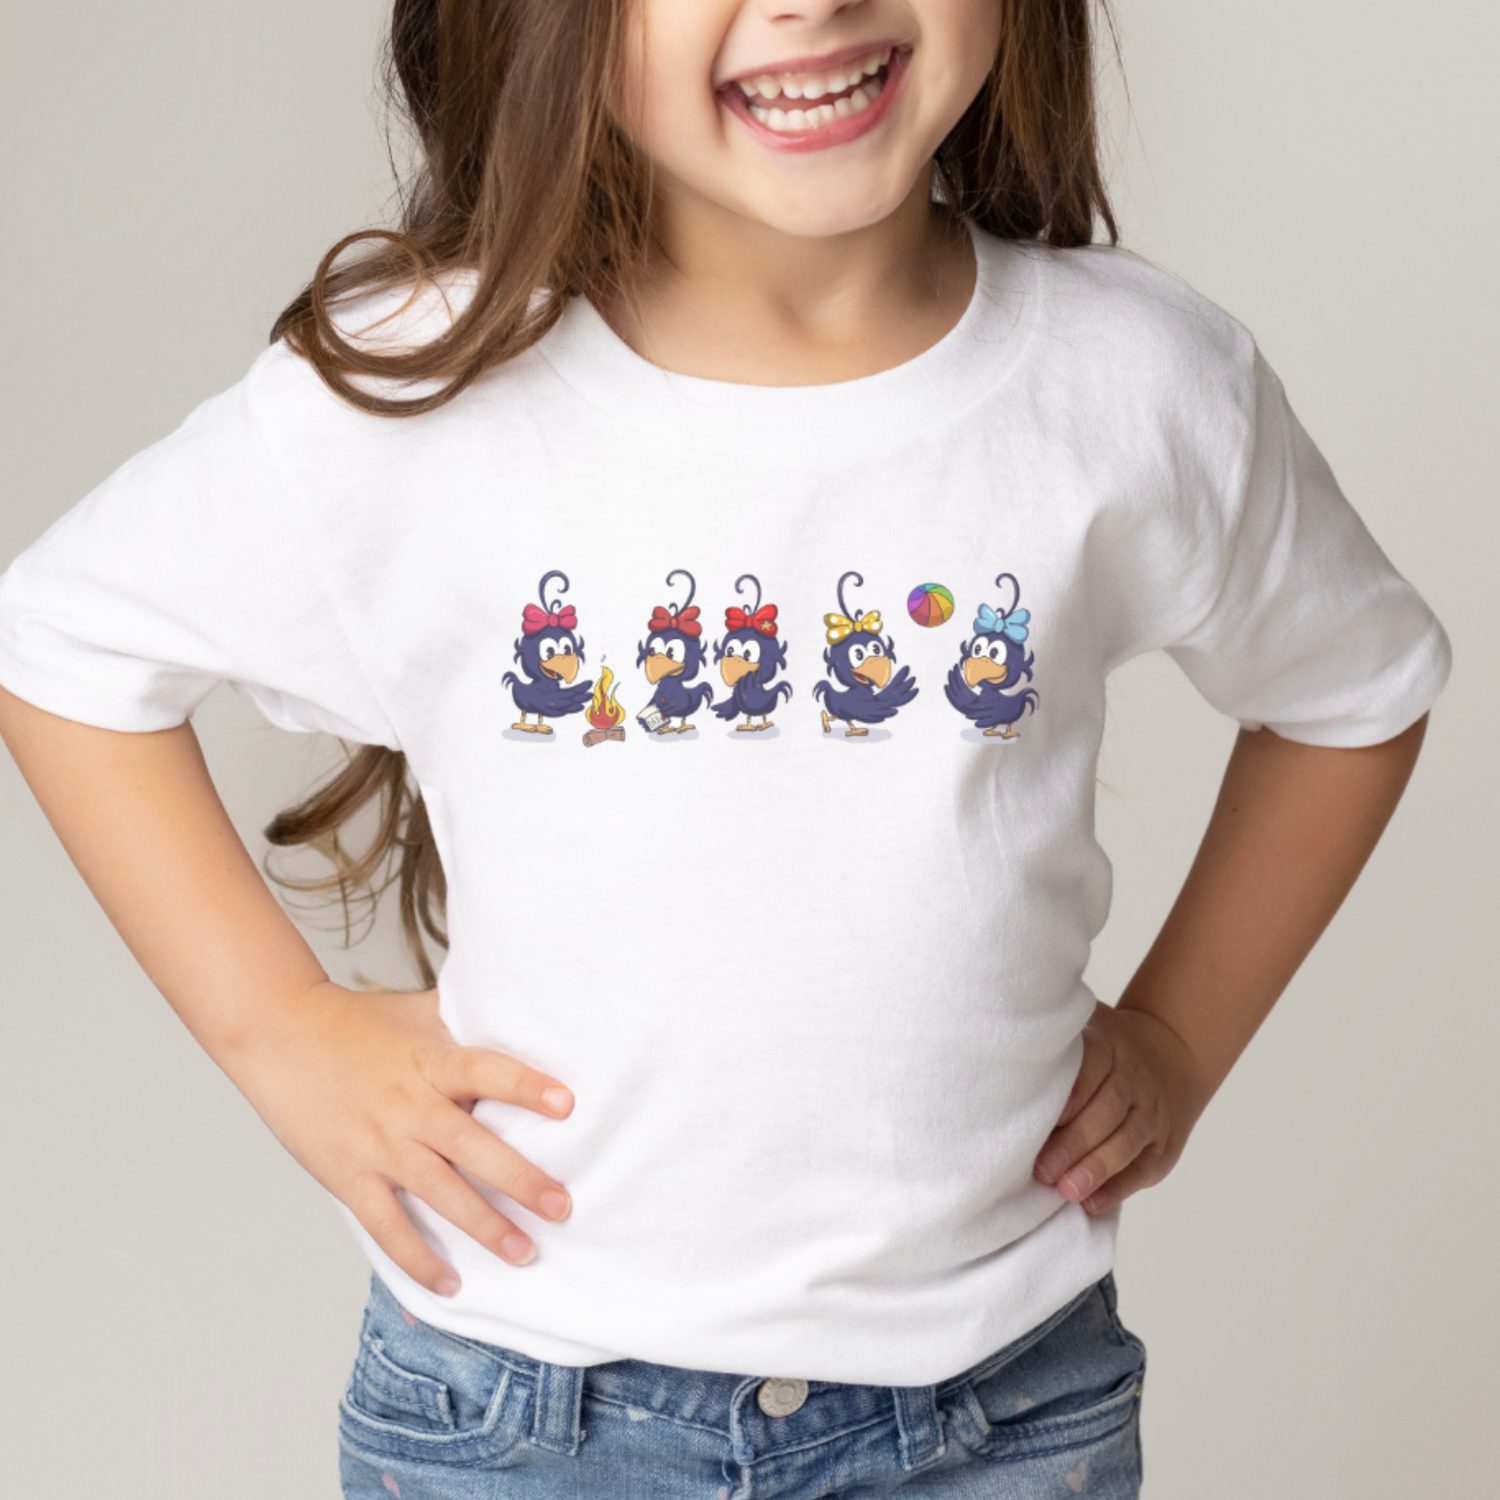 Curly Crow Kids Apparel, Kids clothing, fun t-shirts for kids, Curly Crow tshirt  